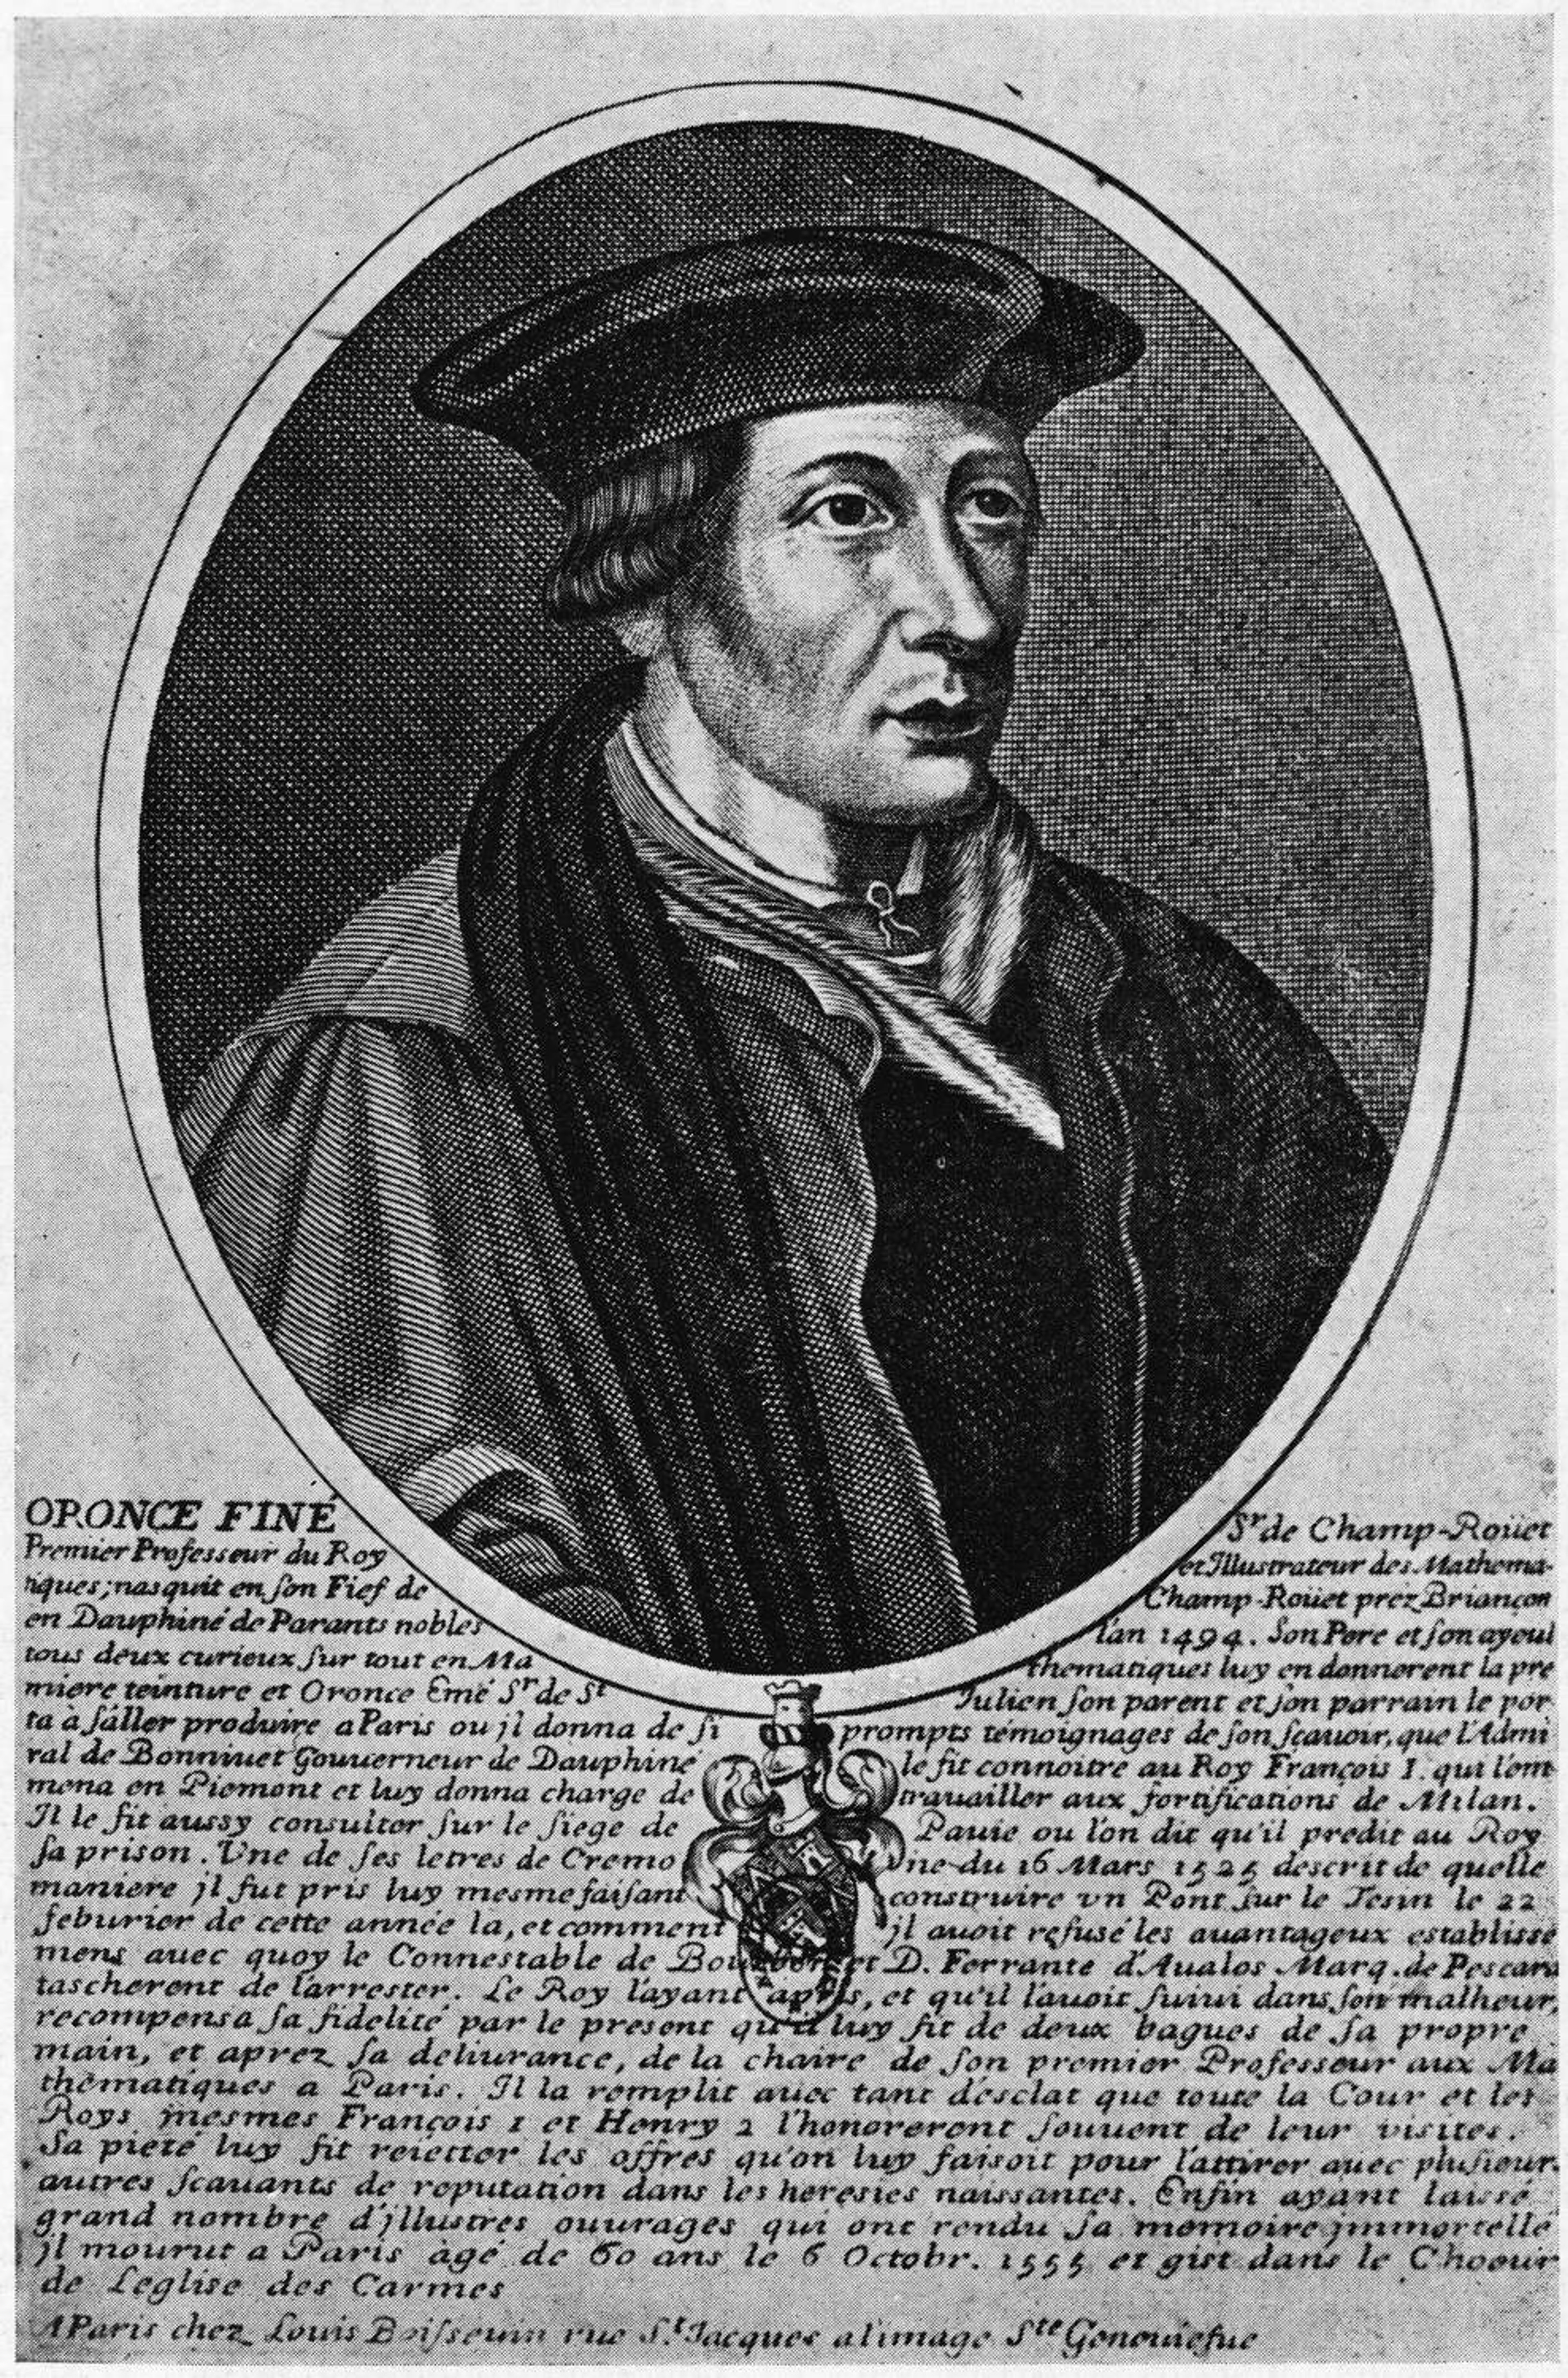 Black and white portrait of Oronce Fine in an oval frame with text beneath the portrait. Oronce Fine is a man with short dark hair, wearing a hat and robes.